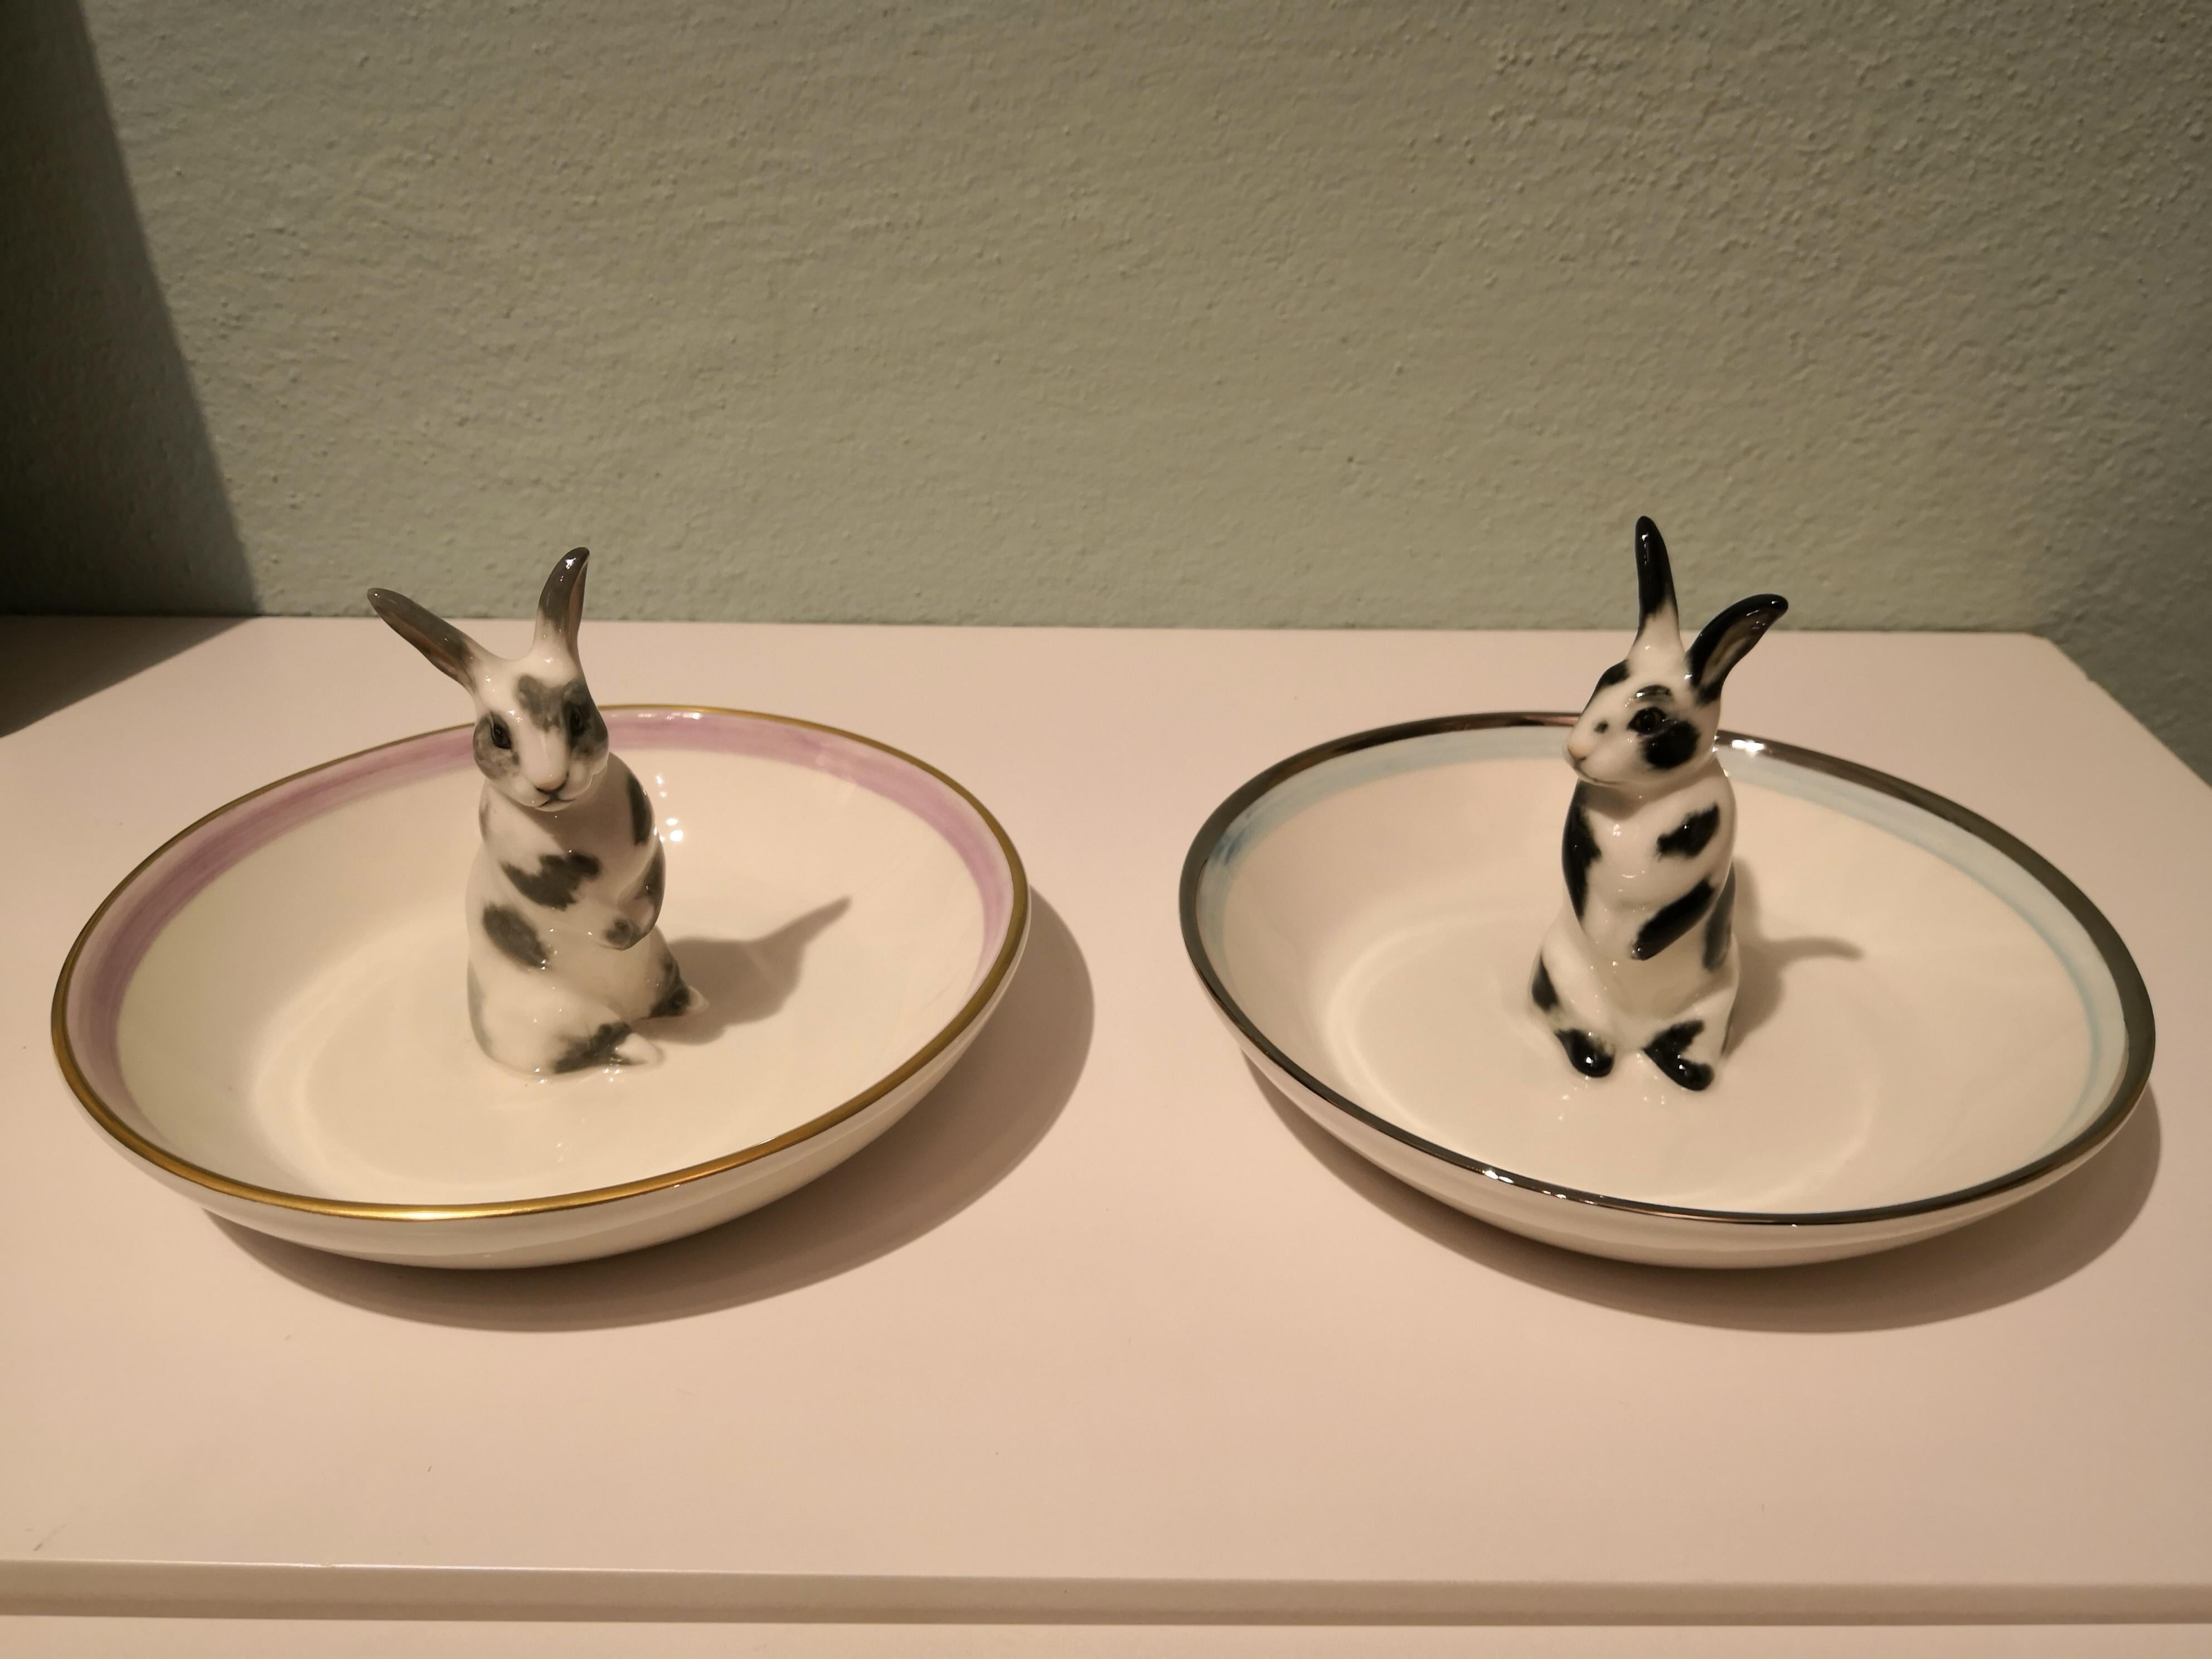 Completely handmade porcelain bowl with a hands-free naturalistic painted Easter hare figure with black spots. The bunny is sitting in the middle of the bowl for decorating nuts or sweets around. Rimmed with a pale blue and platinum line. Handmade